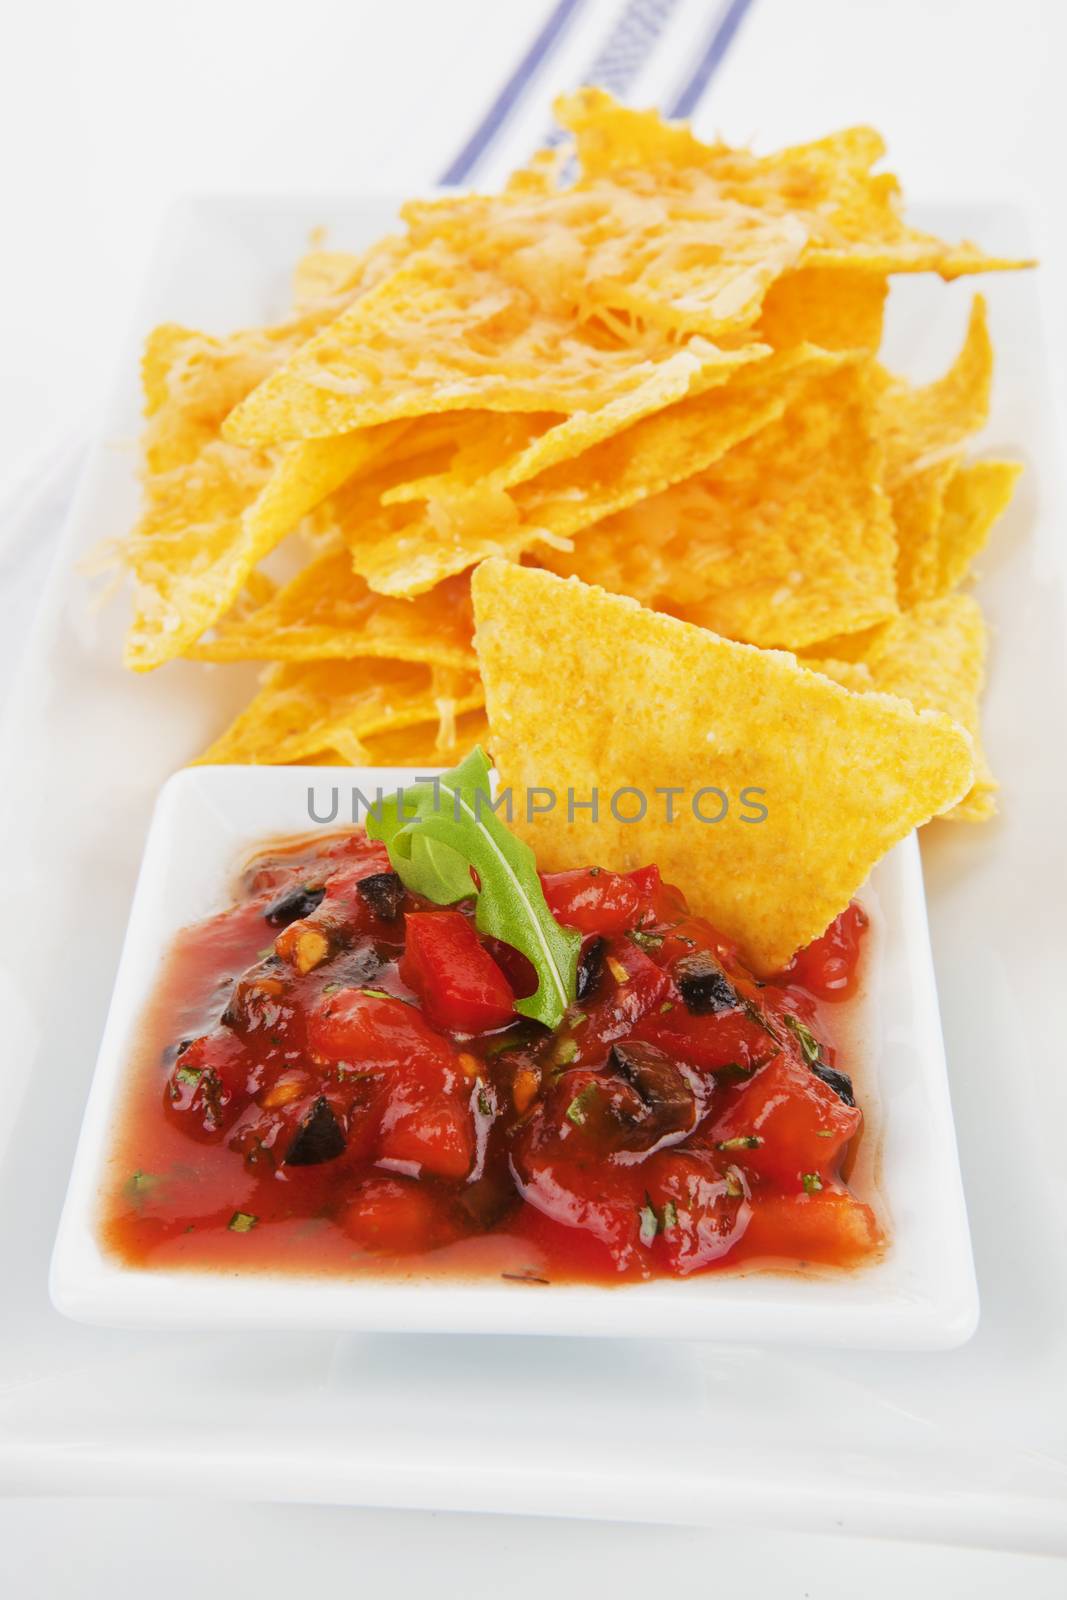 Delicious nachos baked with cheese and tasty homemade tomato sauce.